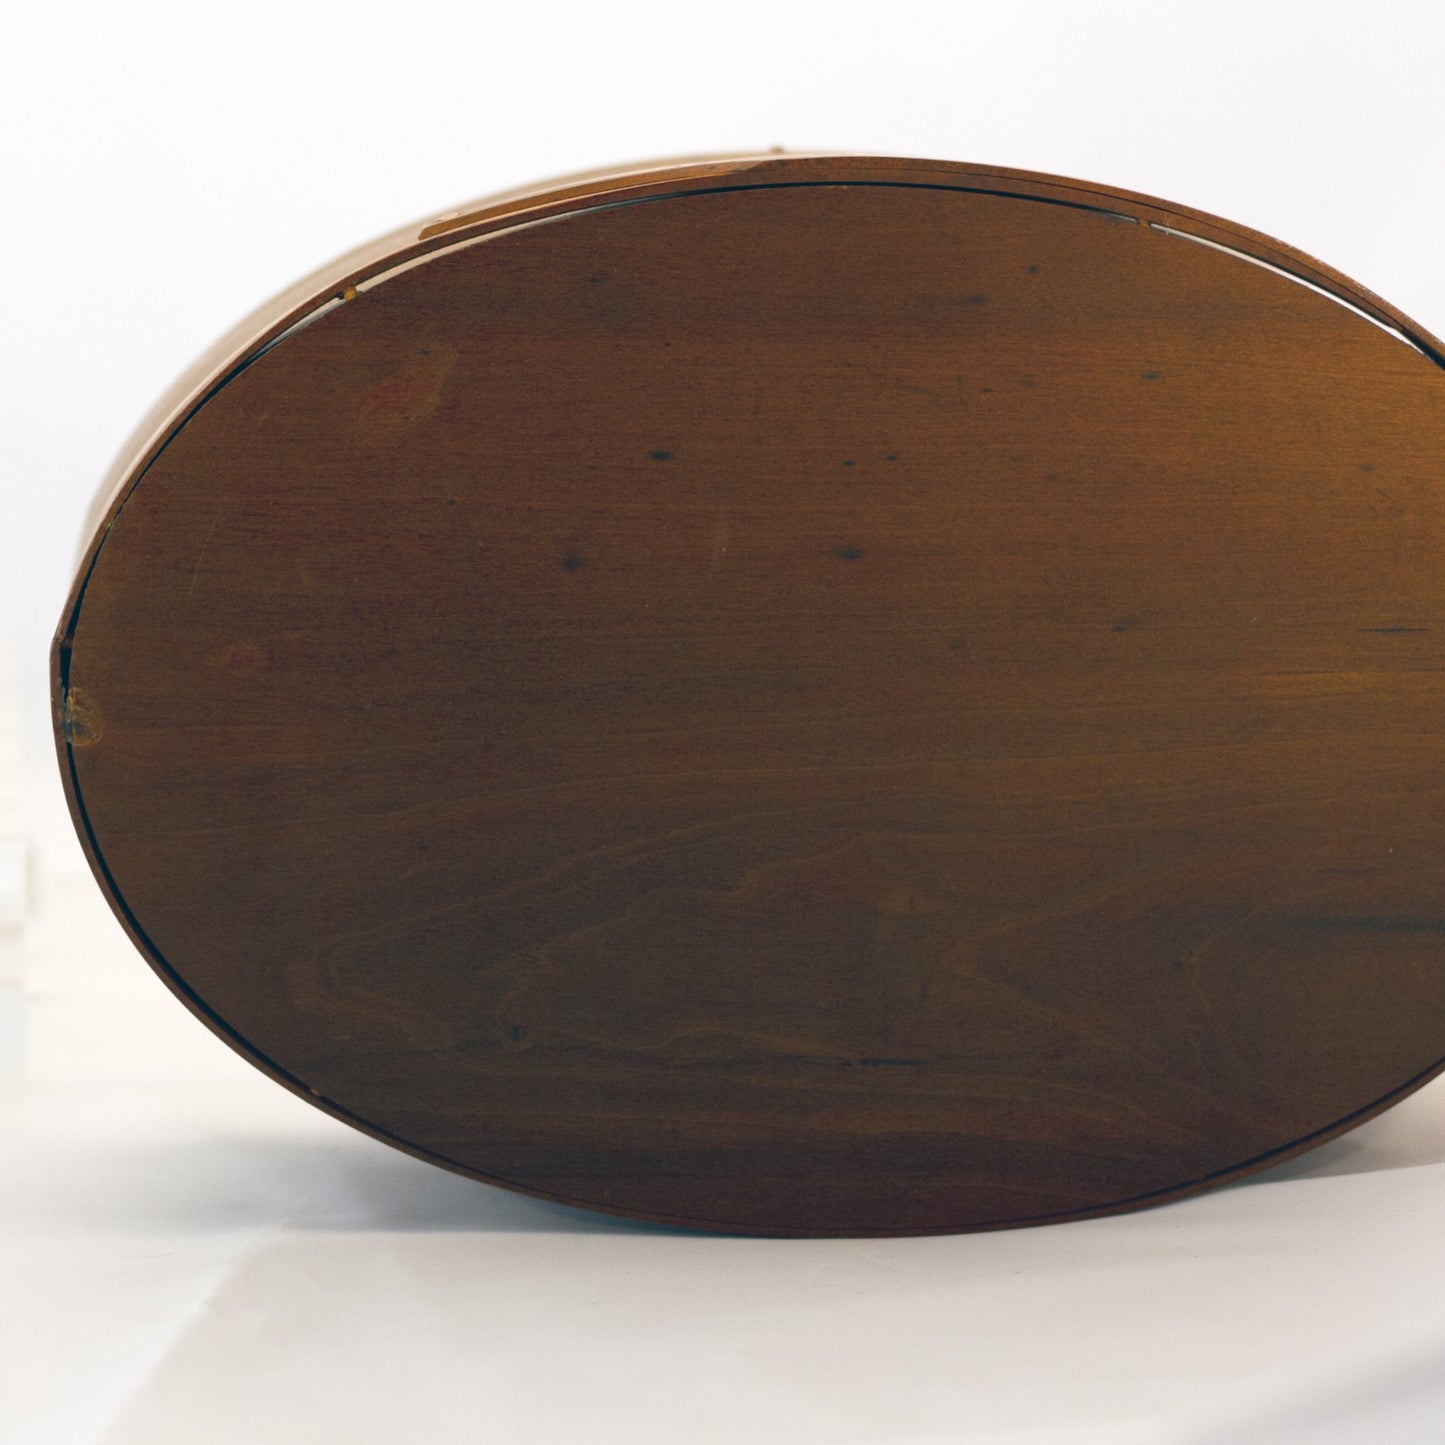 SHAKER-STYLE Oval Box with Swallow Tail Joints